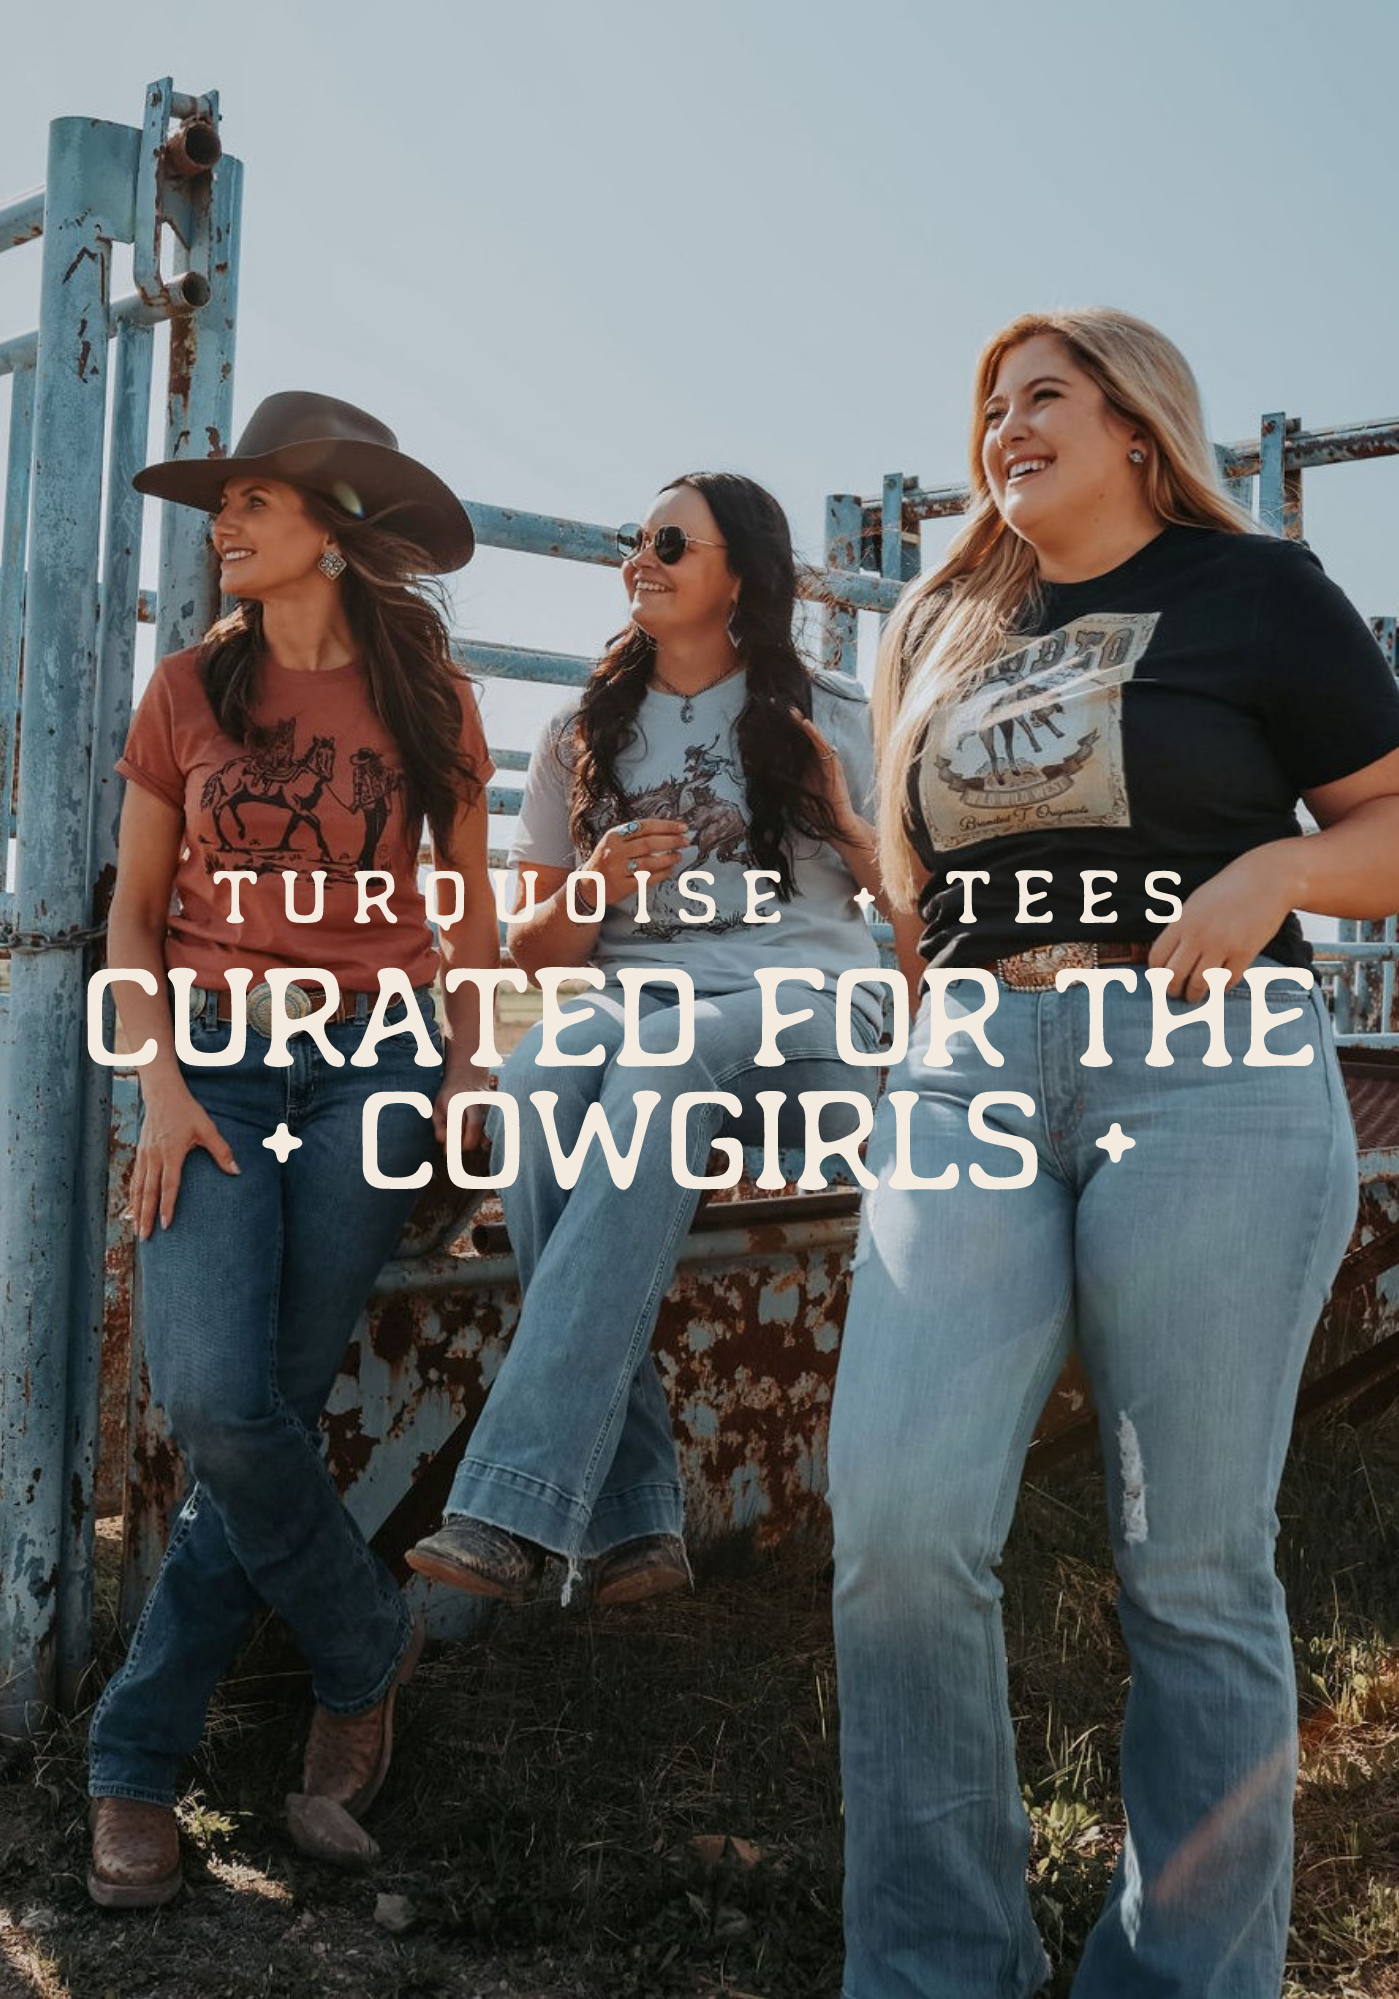 3 Cowgirls wearing western graphic tees